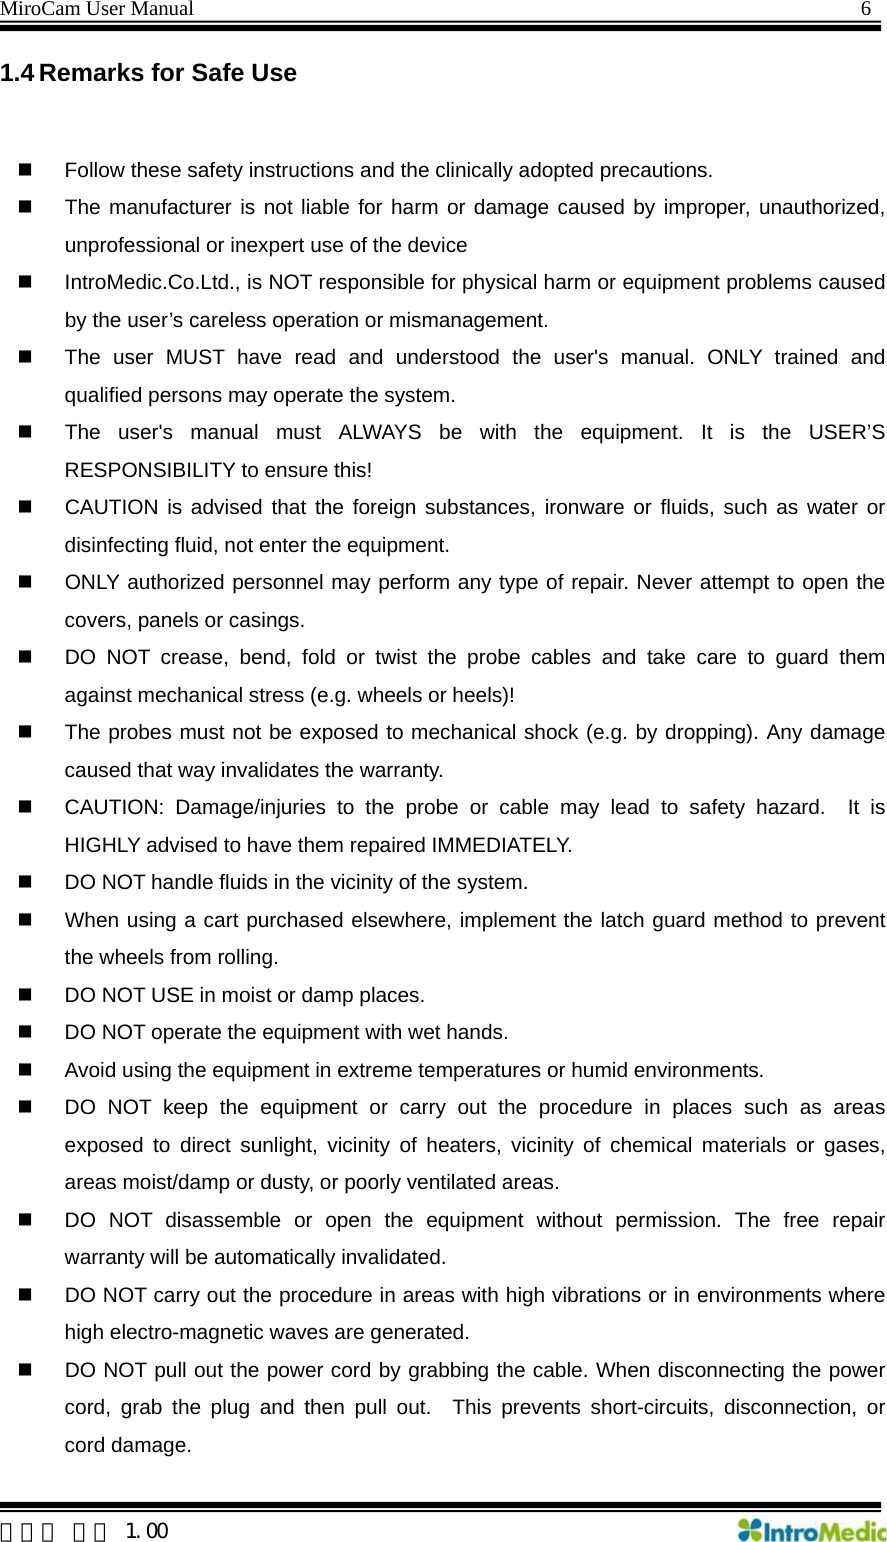 MiroCam User Manual                                                                6  한글판 버전 1.00 1.4 Remarks for Safe Use    Follow these safety instructions and the clinically adopted precautions.   The manufacturer is not liable for harm or damage caused by improper, unauthorized, unprofessional or inexpert use of the device   IntroMedic.Co.Ltd., is NOT responsible for physical harm or equipment problems caused by the user’s careless operation or mismanagement.   The user MUST have read and understood the user&apos;s manual. ONLY trained and qualified persons may operate the system.   The user&apos;s manual must ALWAYS be with the equipment. It is the USER’S RESPONSIBILITY to ensure this!   CAUTION is advised that the foreign substances, ironware or fluids, such as water or disinfecting fluid, not enter the equipment.   ONLY authorized personnel may perform any type of repair. Never attempt to open the covers, panels or casings.   DO NOT crease, bend, fold or twist the probe cables and take care to guard them against mechanical stress (e.g. wheels or heels)!     The probes must not be exposed to mechanical shock (e.g. by dropping). Any damage caused that way invalidates the warranty.   CAUTION: Damage/injuries to the probe or cable may lead to safety hazard.  It is HIGHLY advised to have them repaired IMMEDIATELY.   DO NOT handle fluids in the vicinity of the system.   When using a cart purchased elsewhere, implement the latch guard method to prevent the wheels from rolling.   DO NOT USE in moist or damp places.     DO NOT operate the equipment with wet hands.   Avoid using the equipment in extreme temperatures or humid environments.   DO NOT keep the equipment or carry out the procedure in places such as areas exposed to direct sunlight, vicinity of heaters, vicinity of chemical materials or gases, areas moist/damp or dusty, or poorly ventilated areas.   DO NOT disassemble or open the equipment without permission. The free repair warranty will be automatically invalidated.     DO NOT carry out the procedure in areas with high vibrations or in environments where high electro-magnetic waves are generated.   DO NOT pull out the power cord by grabbing the cable. When disconnecting the power cord, grab the plug and then pull out.  This prevents short-circuits, disconnection, or cord damage. 